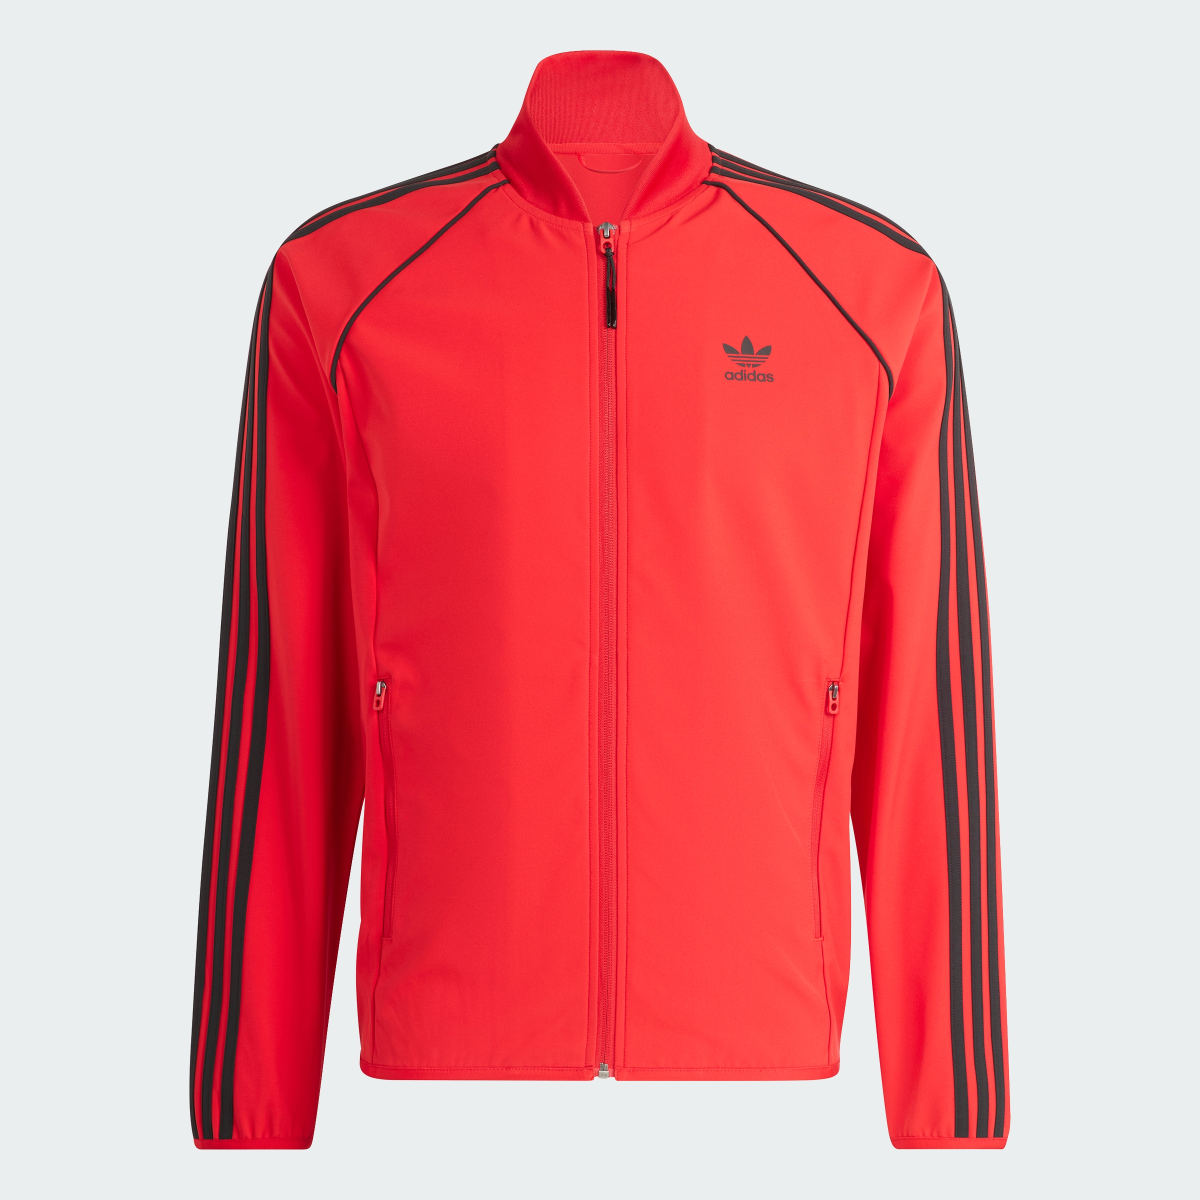 Adidas SST Bonded Track Top. 5